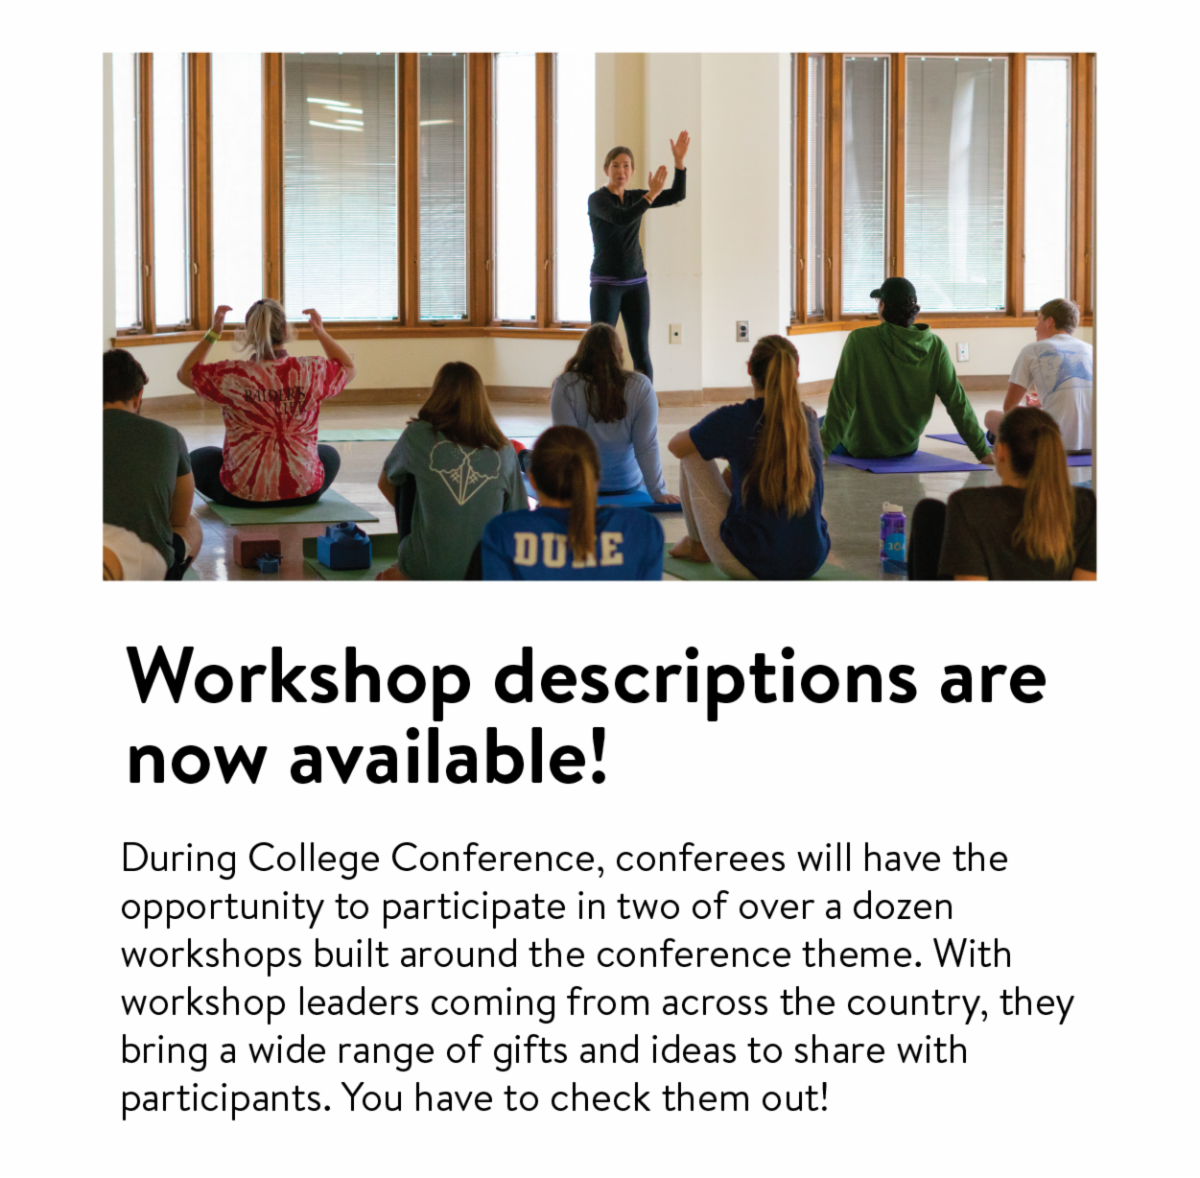 Workshop descriptions are now available! - During College Conference, conferees will have the opportunity to participate in two of over a dozen workshops built around the conference theme. With workshop leaders coming from across the country, they bring a wide range of gifts and ideas to share with participants. You have to check them out!